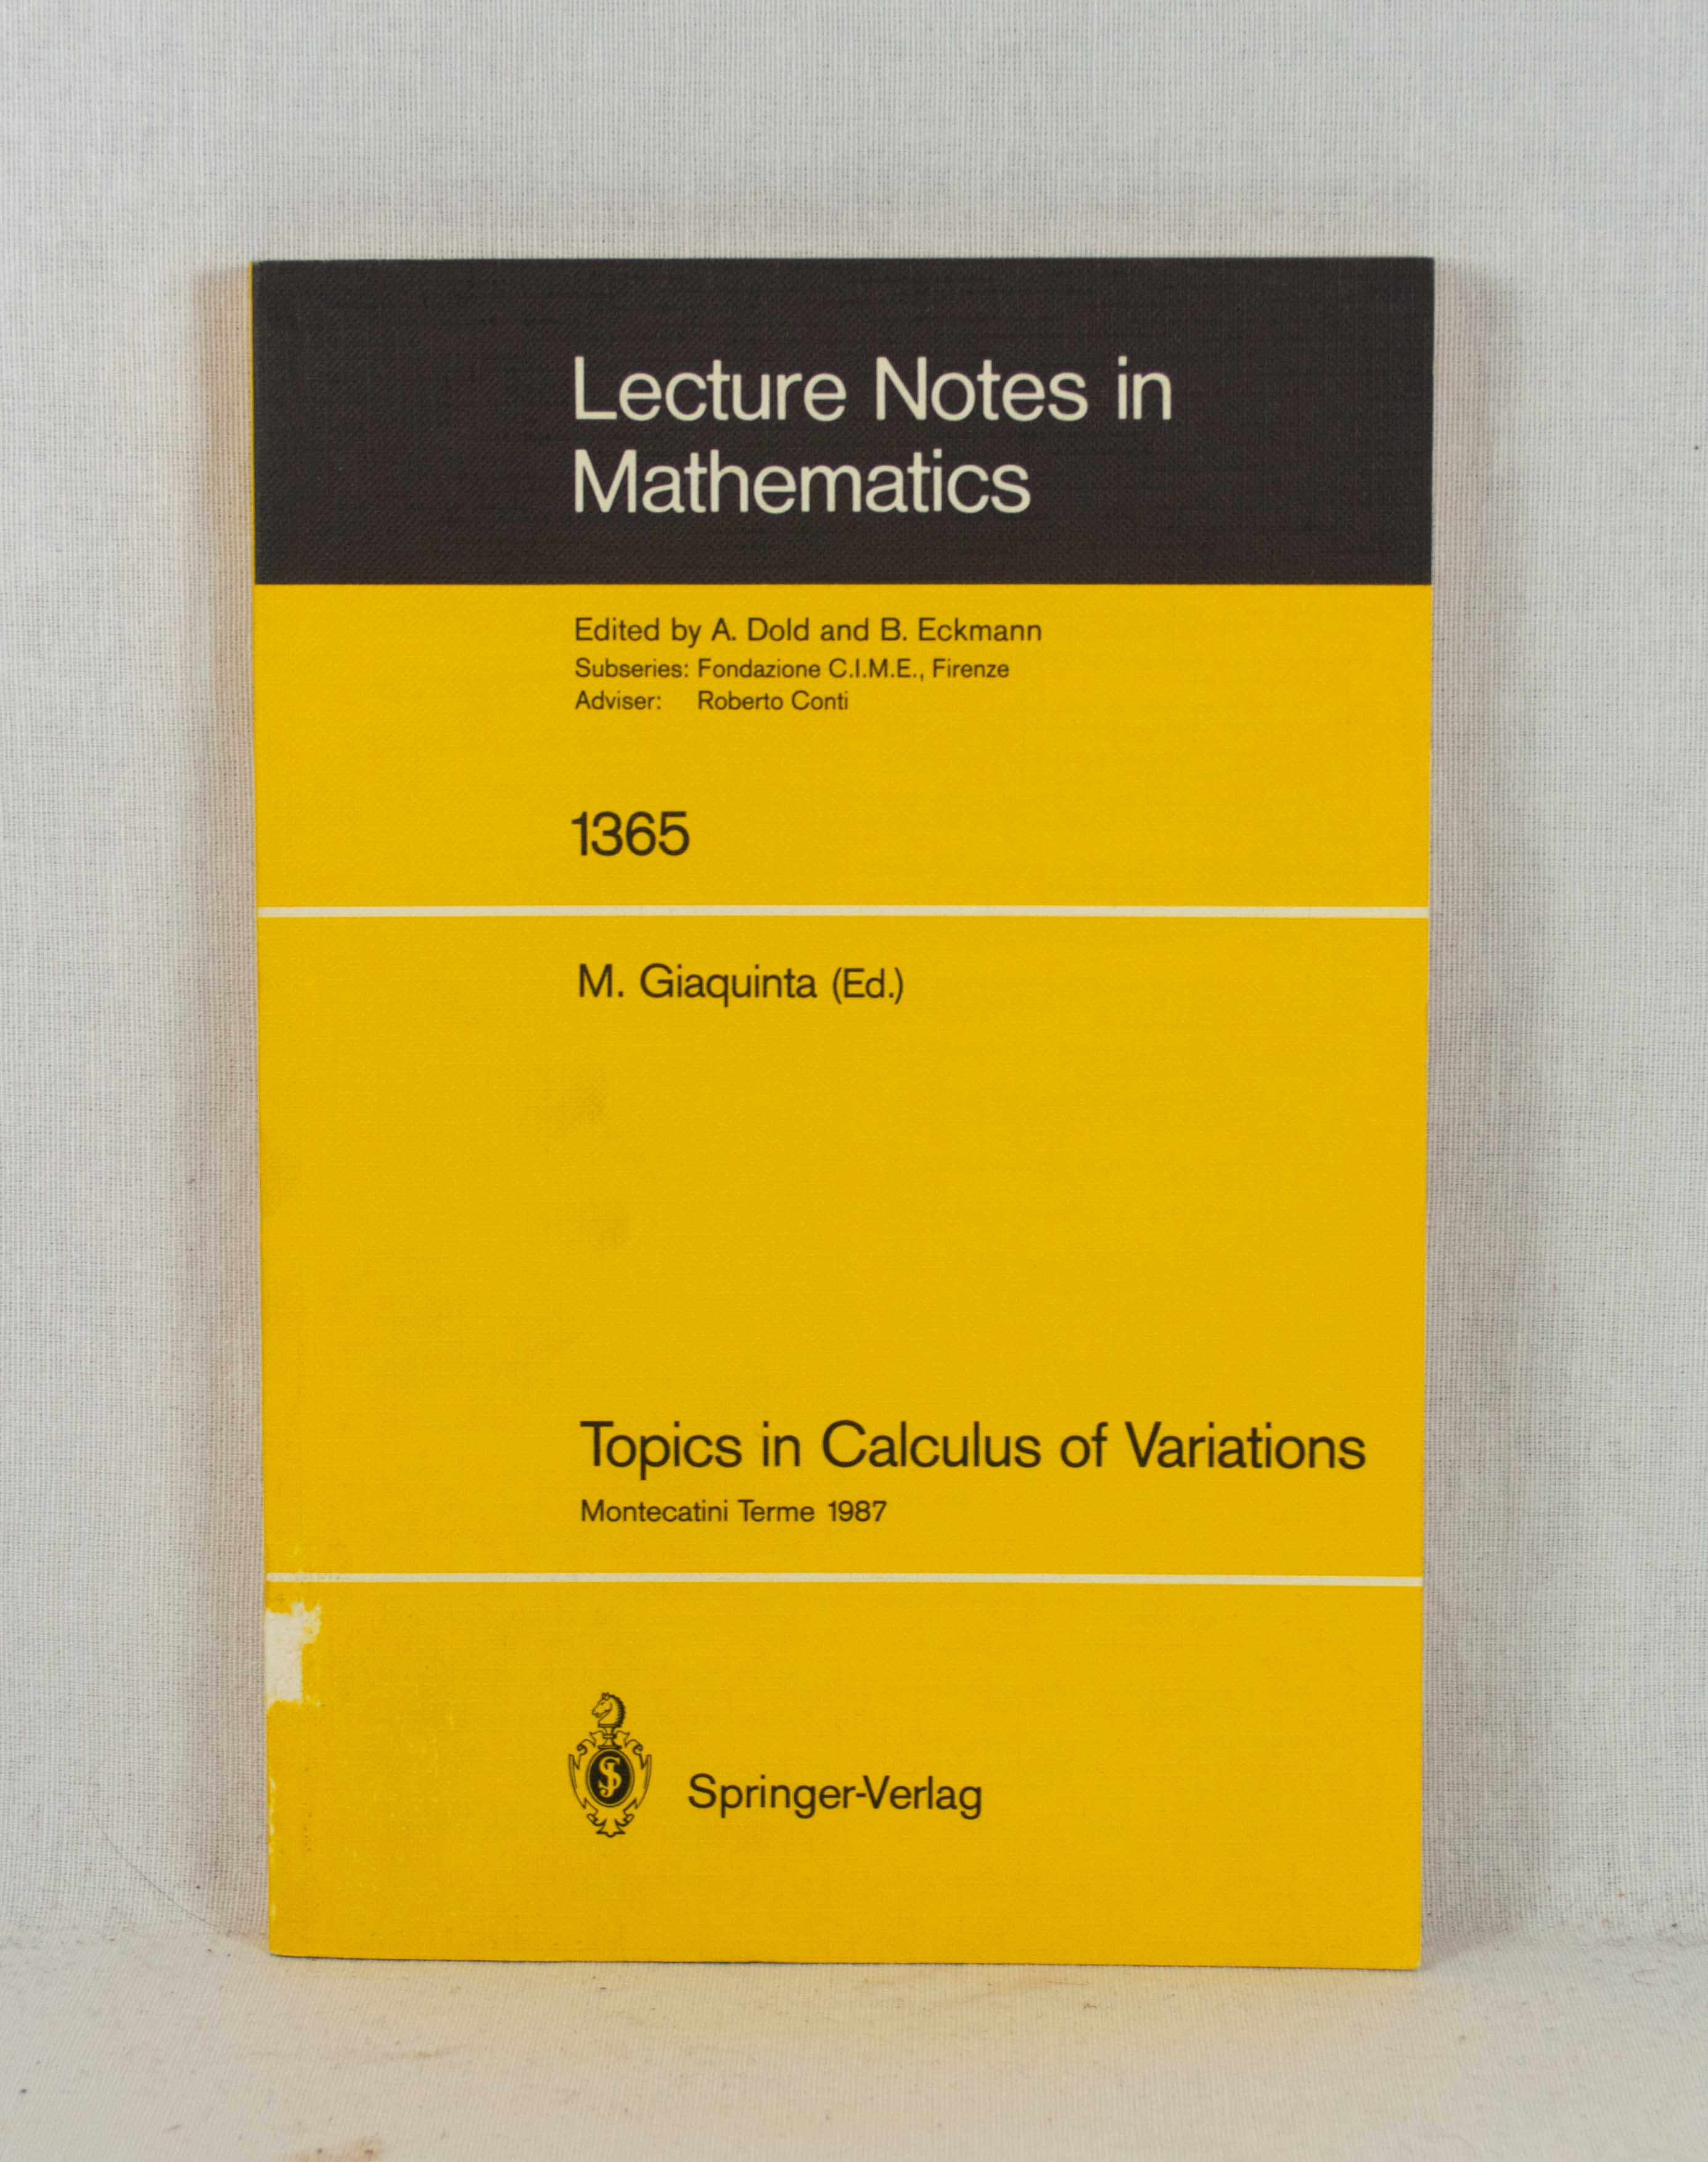 Topics in Calculus of Variations: Lectures given at held at the 2nd 1987 Session of the Centro Internazionale Matematico Estivo (C.I.M.E.) held at Montecatini Terme, Italy, July 20 - 28, 1987. (= Lecture Notes in Mathematics, Vol. 1365). - Giaquinta, Mariano (Ed.)